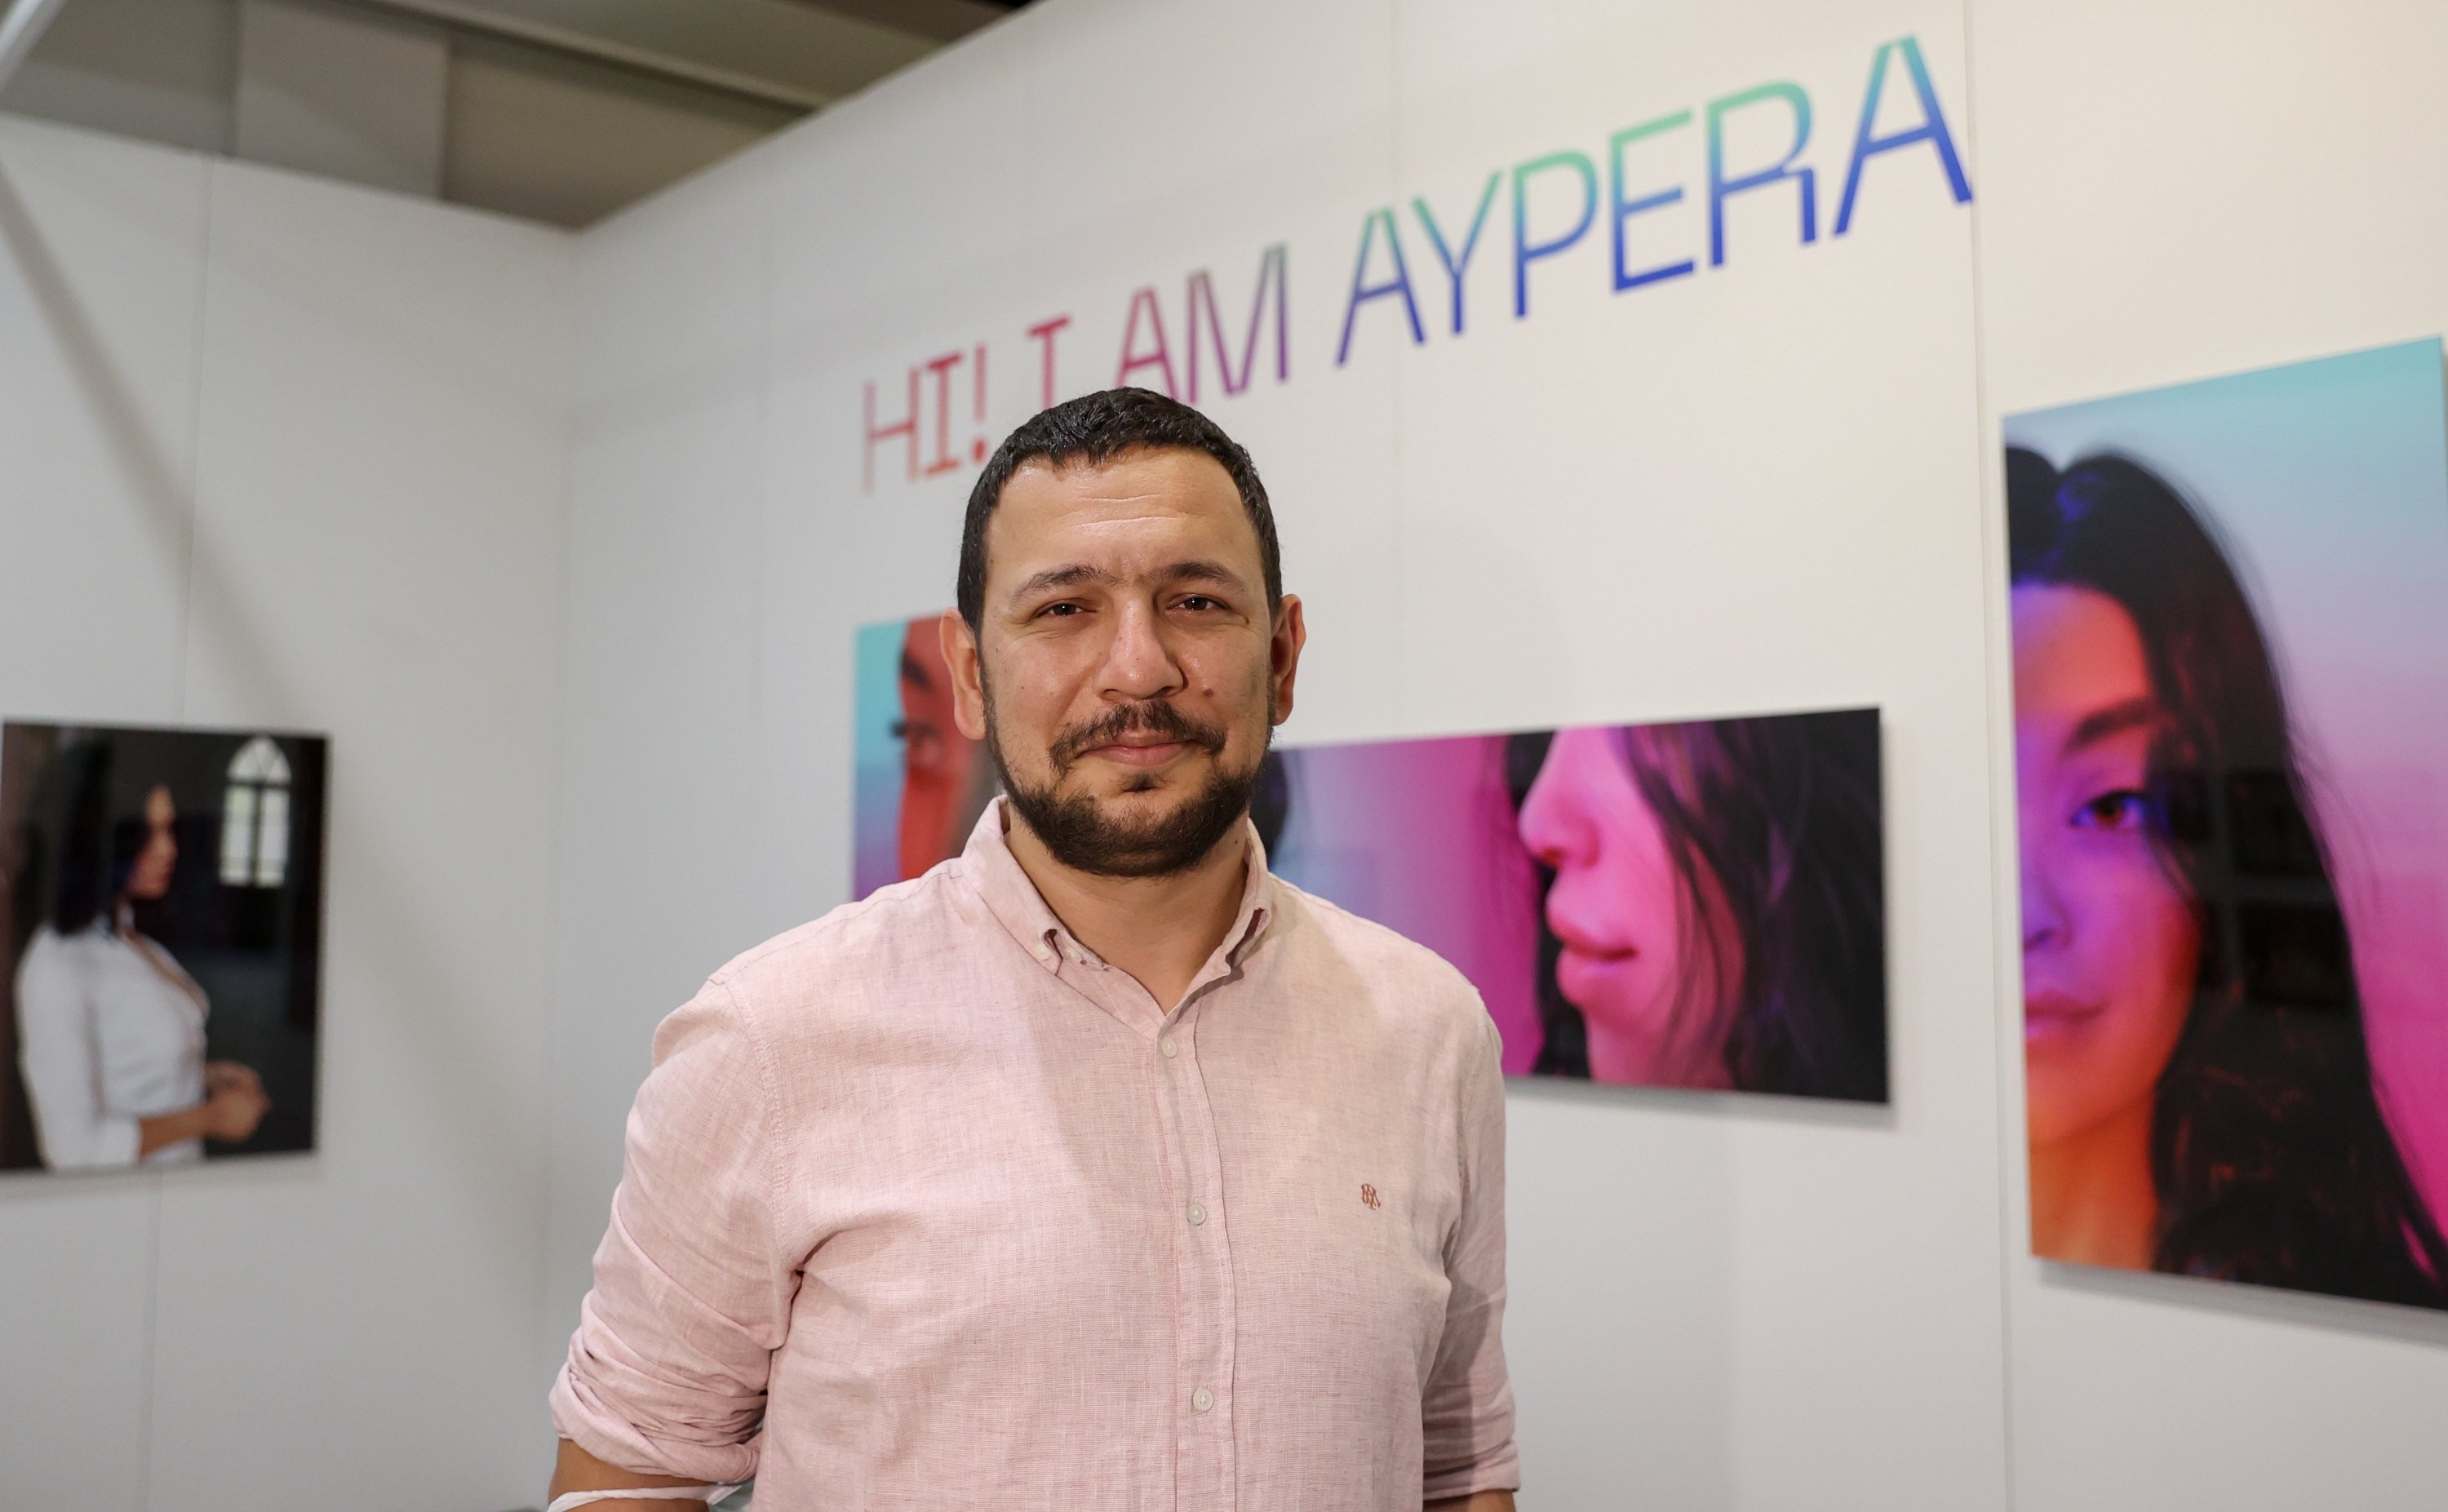 Science communicator Tevfik Uyar poses in front of the Aypera poster exhibition at Contemporary Istanbul, Istanbul, Turkey, June 2, 2021. (AA Photo)